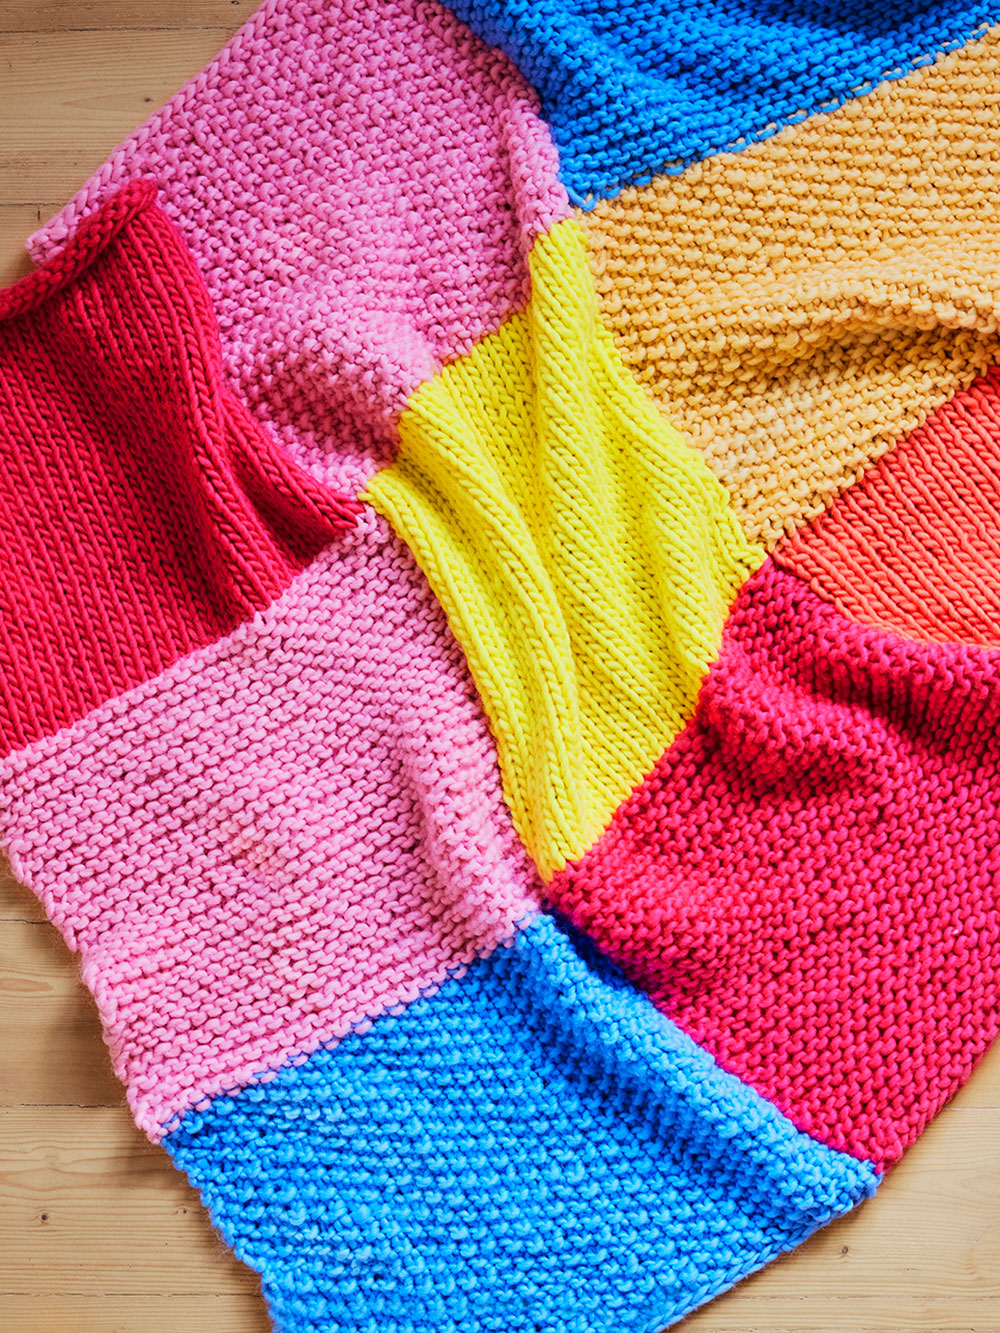 How to Knit a Blanket Knitting Kit